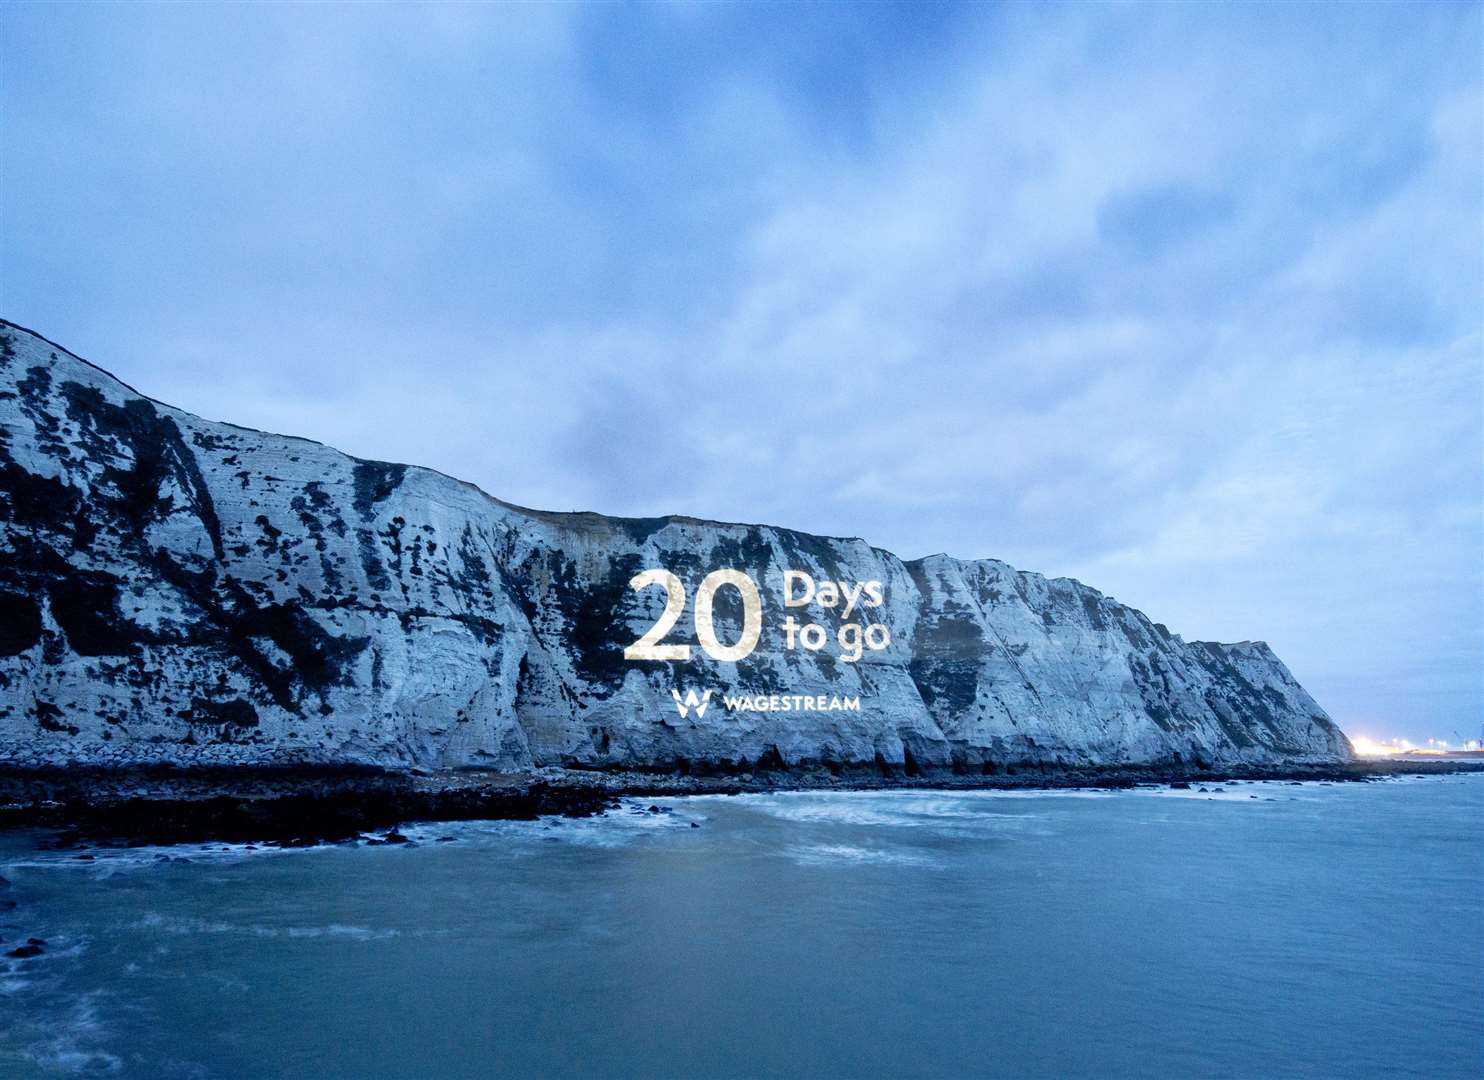 The countdown on the cliffs. Picture by Georgie Scott